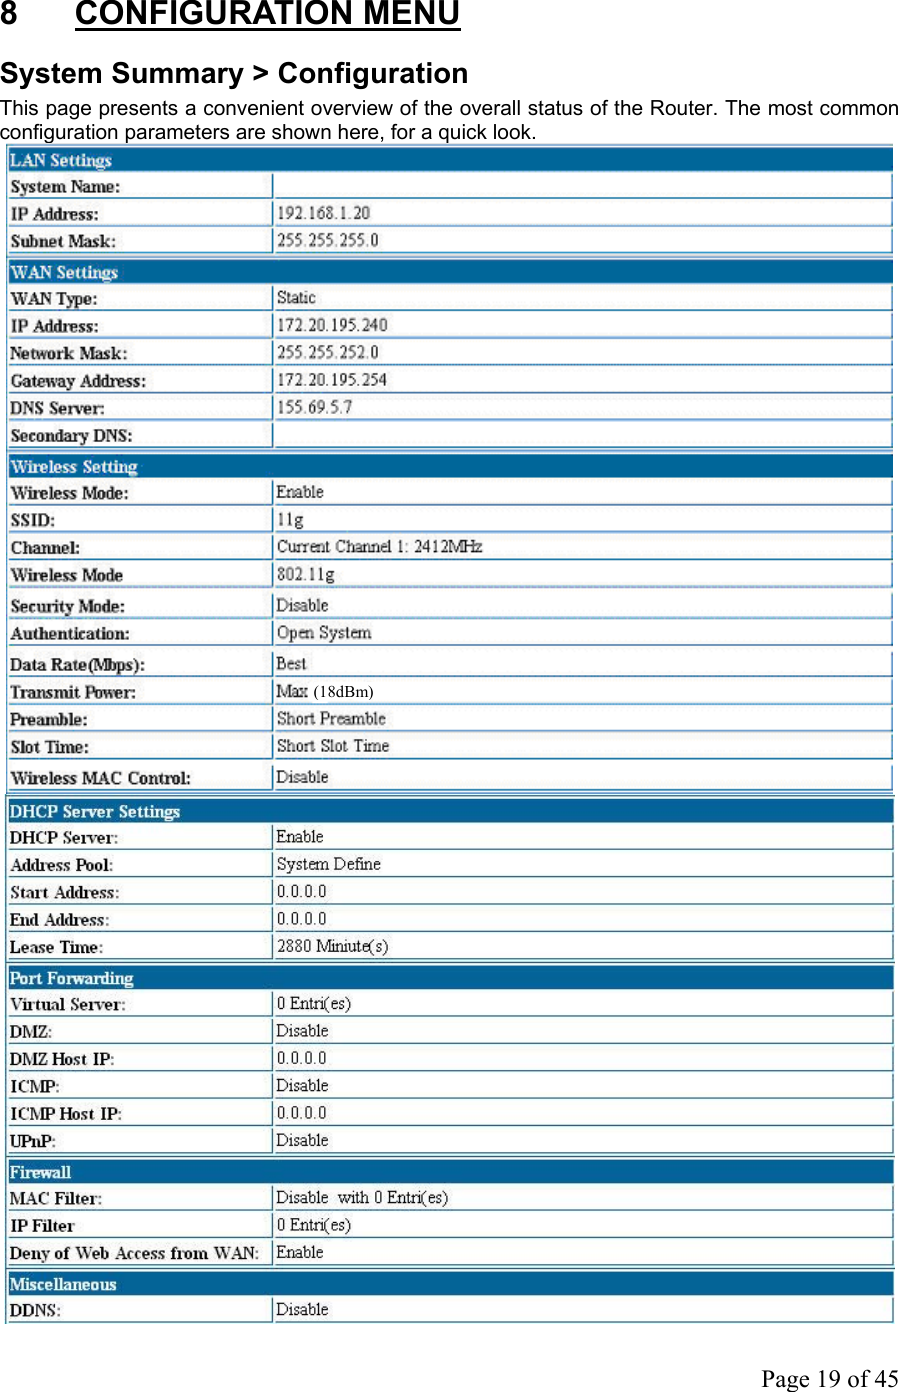 8 CONFIGURATION MENU System Summary &gt; Configuration This page presents a convenient overview of the overall status of the Router. The most common configuration parameters are shown here, for a quick look.  (18dBm)    Page 19 of 45     